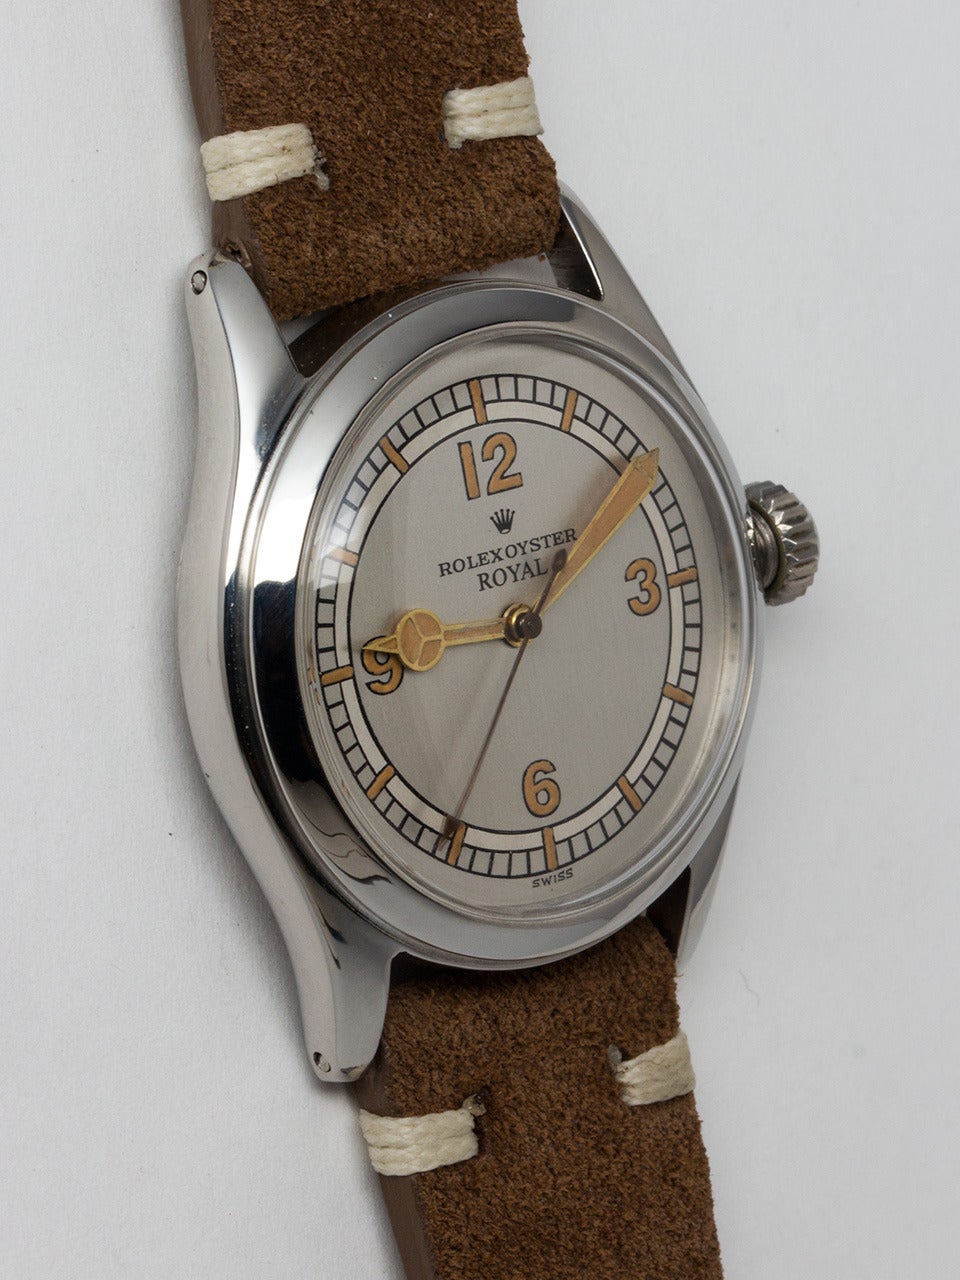 Rolex Stainless Steel Oyster Royal Wristwatch ref 4377 serial 303,xxx circa 1957. 35mm diameter Oyster case with beautifully restored sector dial with antique luminous indexes and hands. Powered by 17 jewel manual wind caliber 10 1/2 H movement with